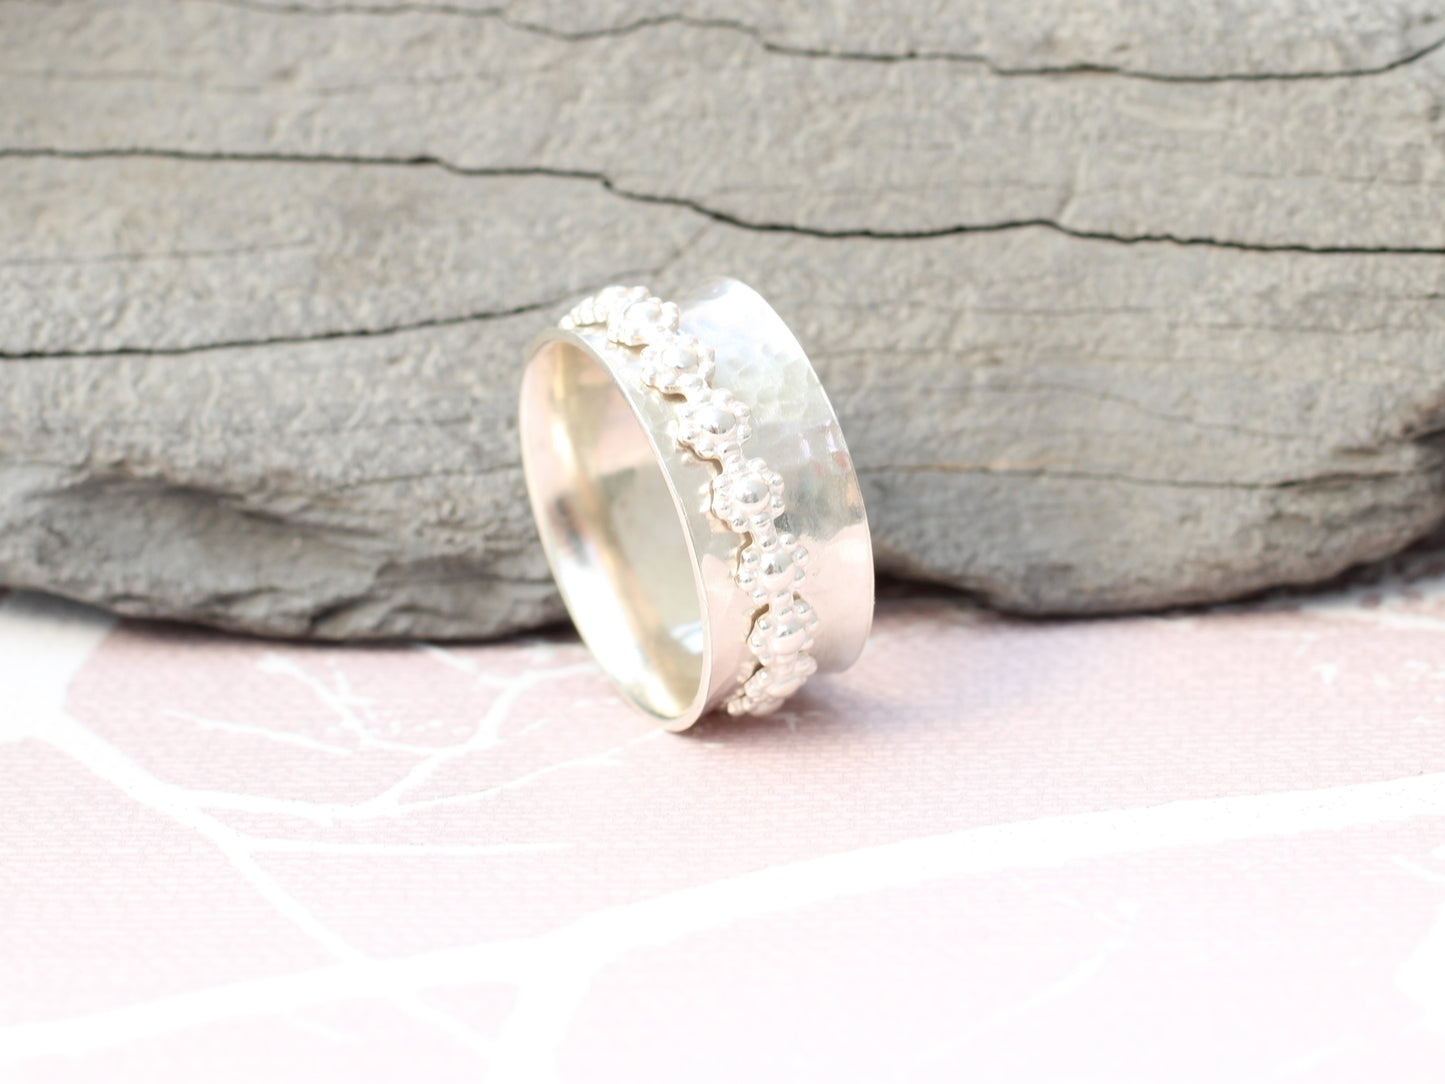 Sterling silver flower/daisy spinner ring. Anxiety ring.